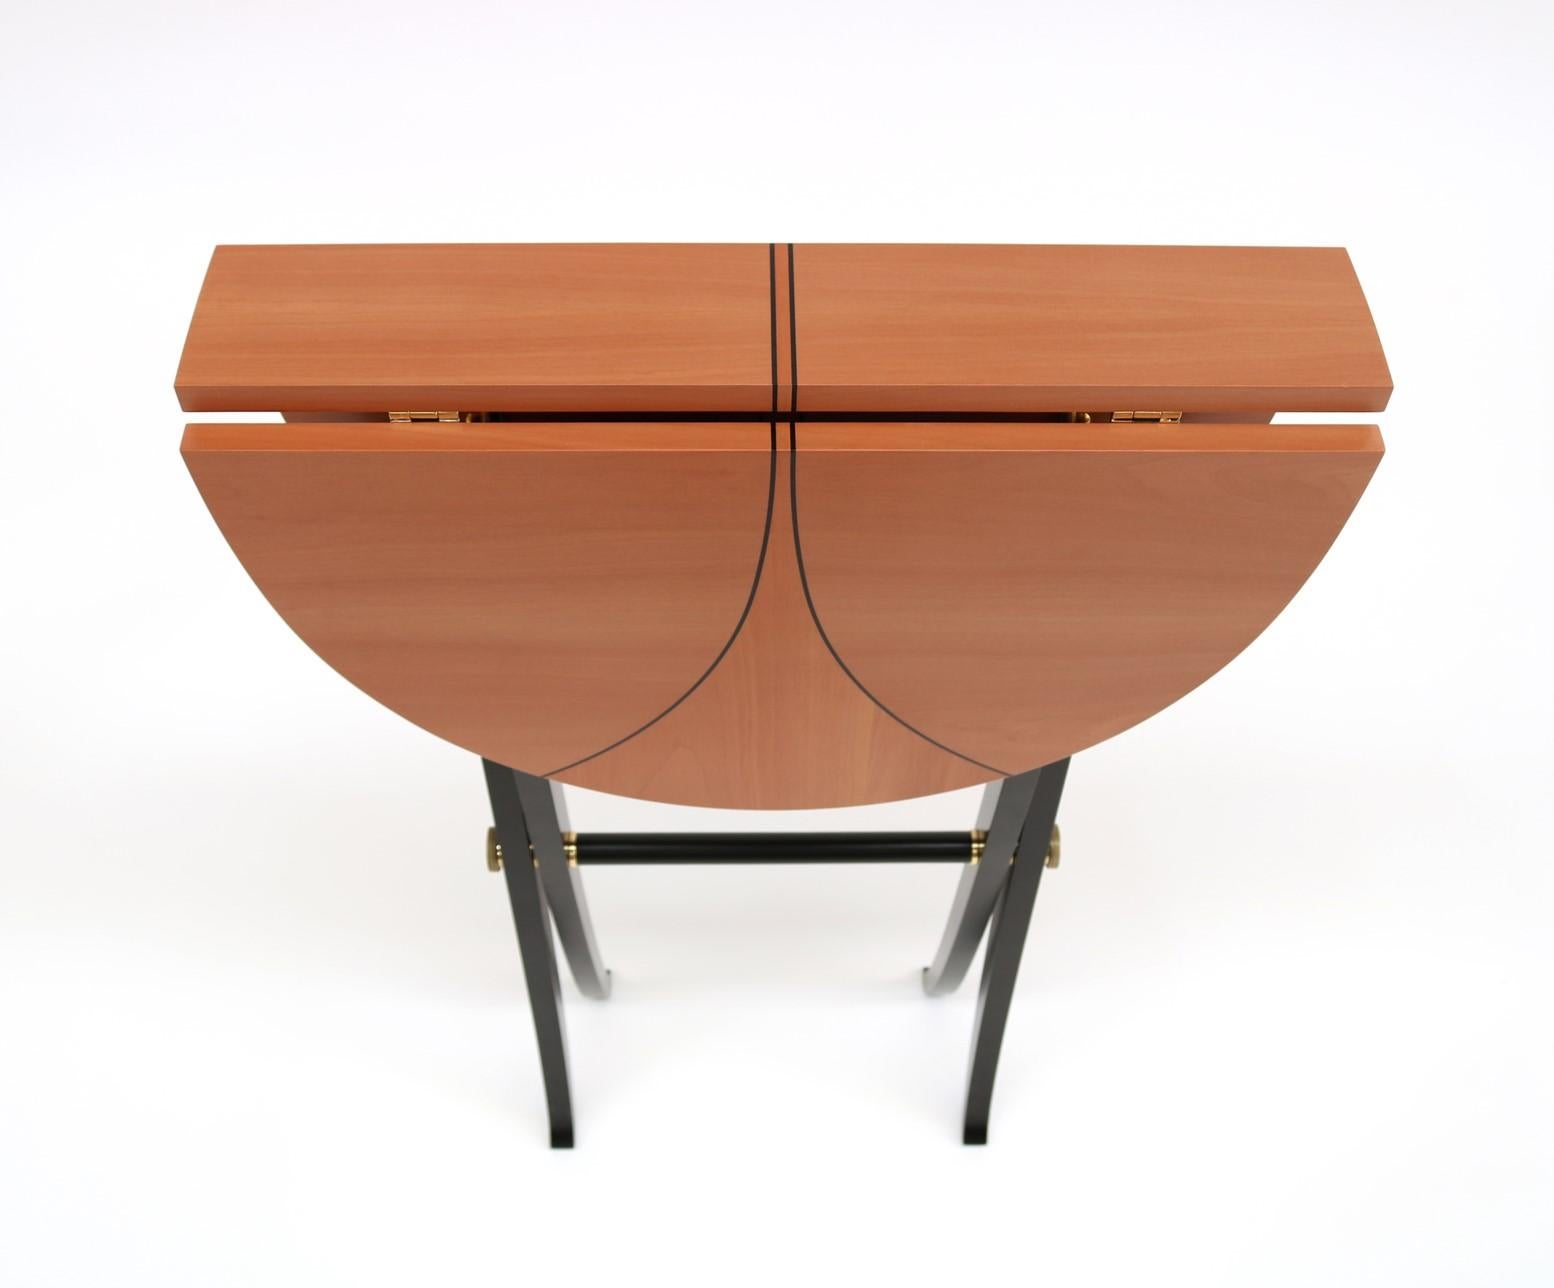 Ariel Ebony Inlaid oval foldable coffee contemporary Table by Giordano Viganò In New Condition For Sale In Novedrate, IT